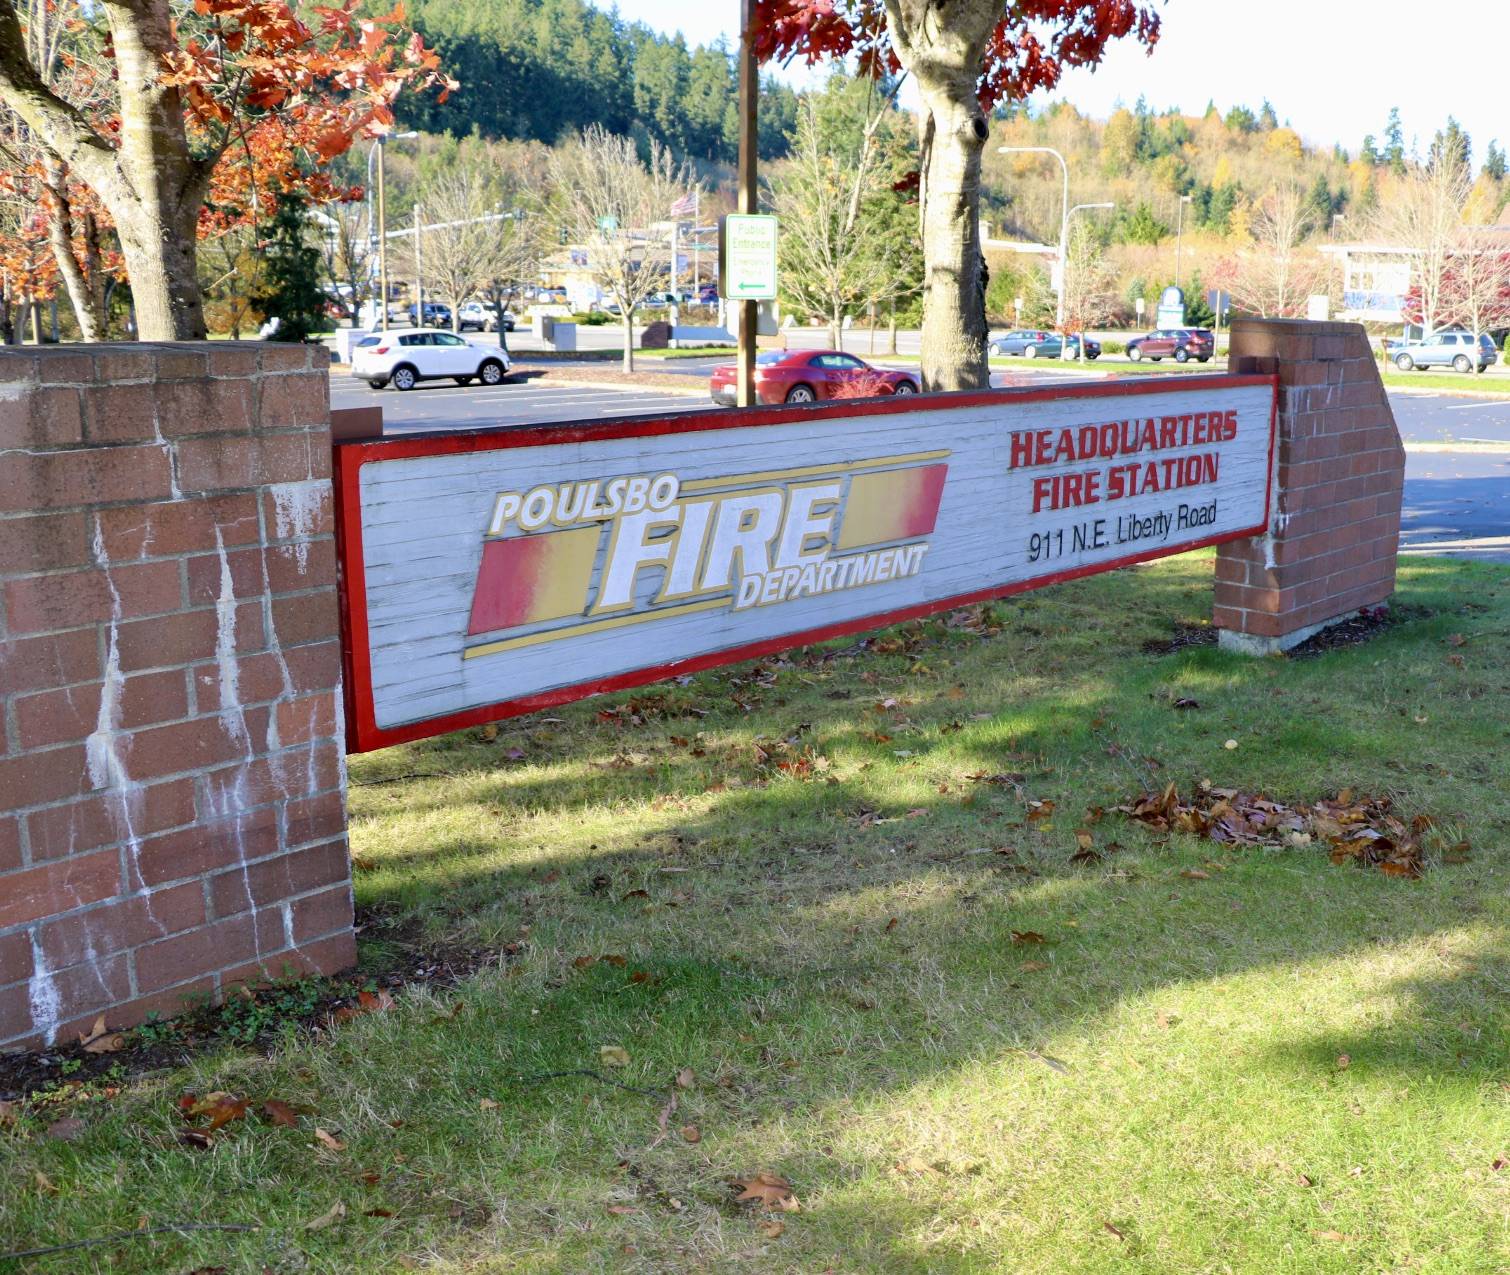 The city of Poulsbo and the Poulsbo Fire Department are partnering for the Fire CARES program starting in January.